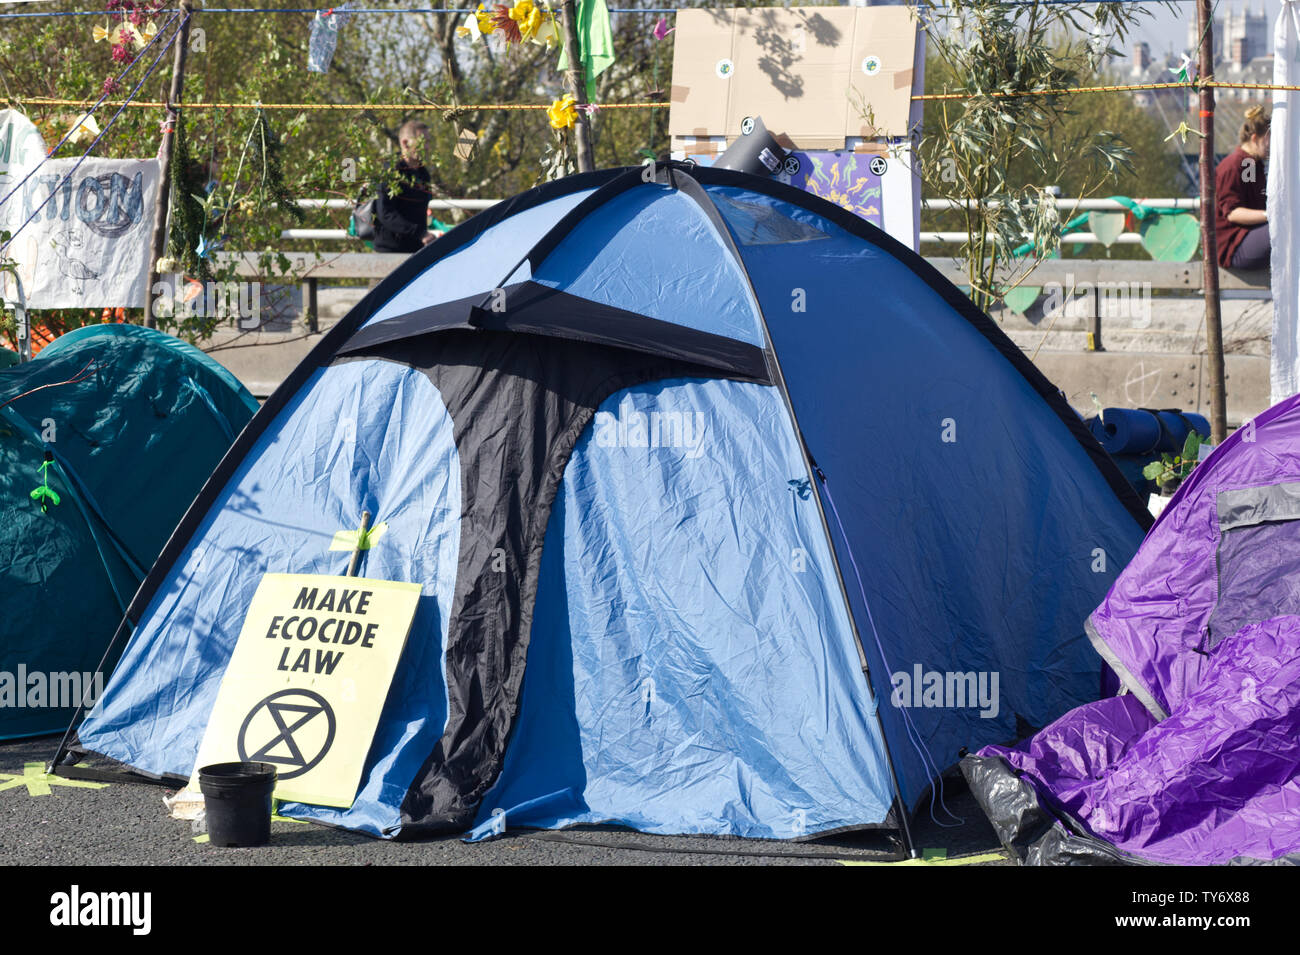 Make ecocide law sign against a tent for the Make ecocide law sign against a tent Stock Photo